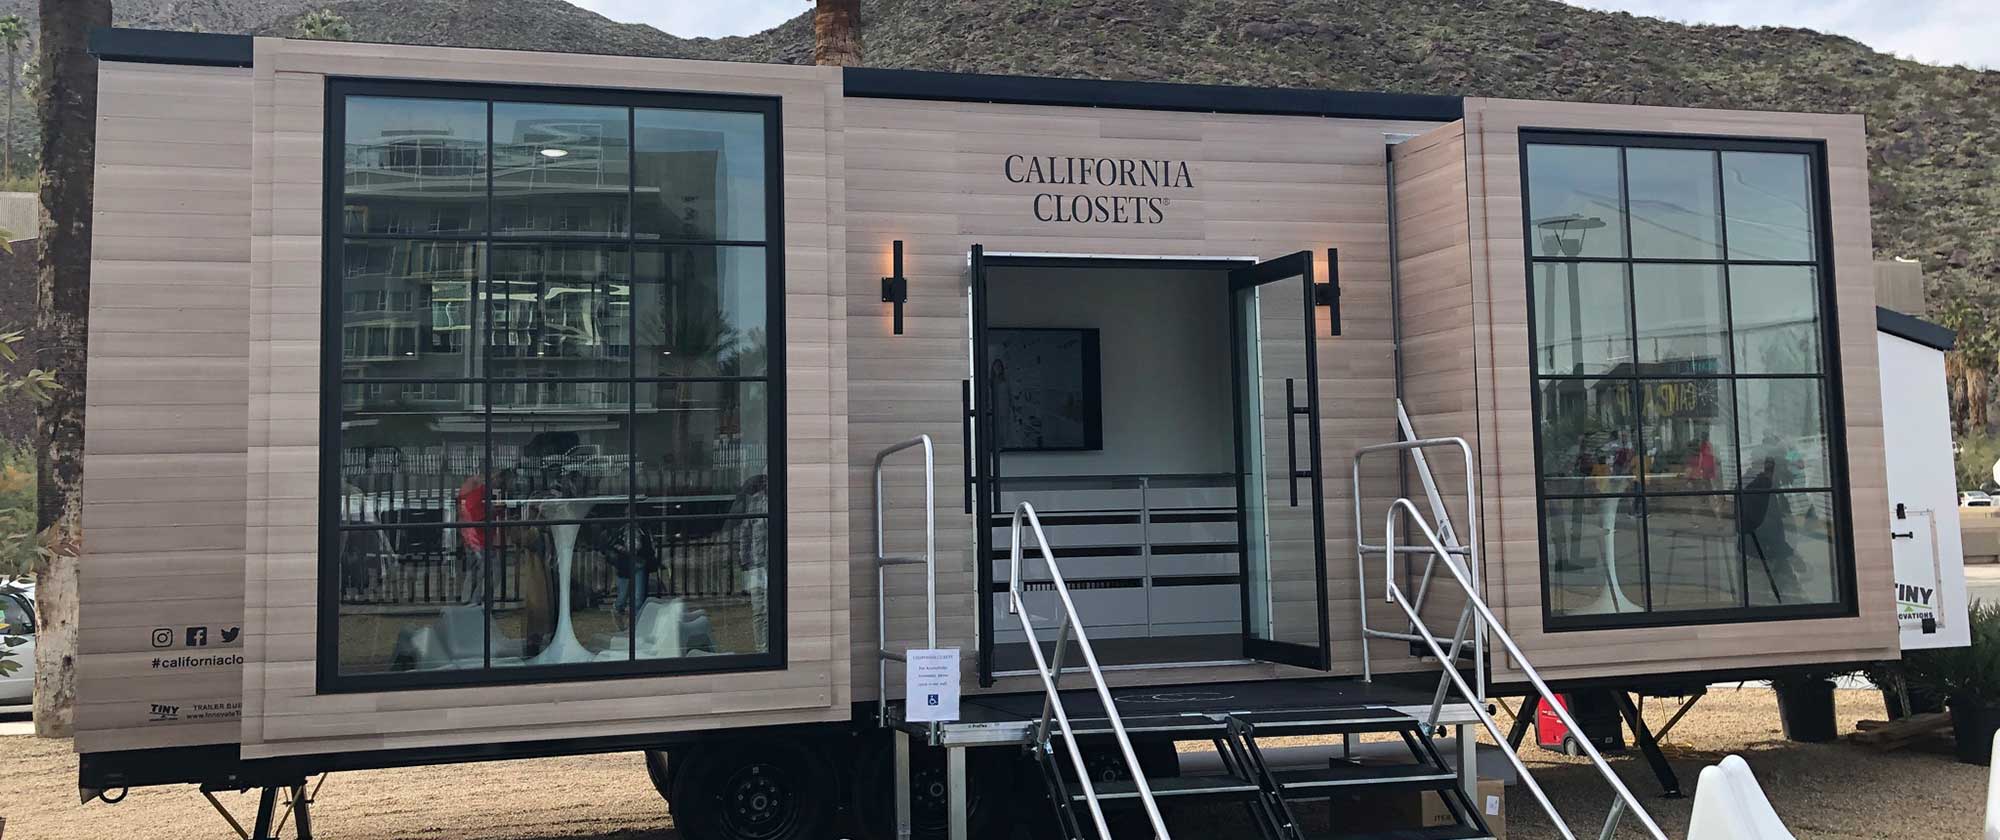 A commercial tiny home sold to California Closets